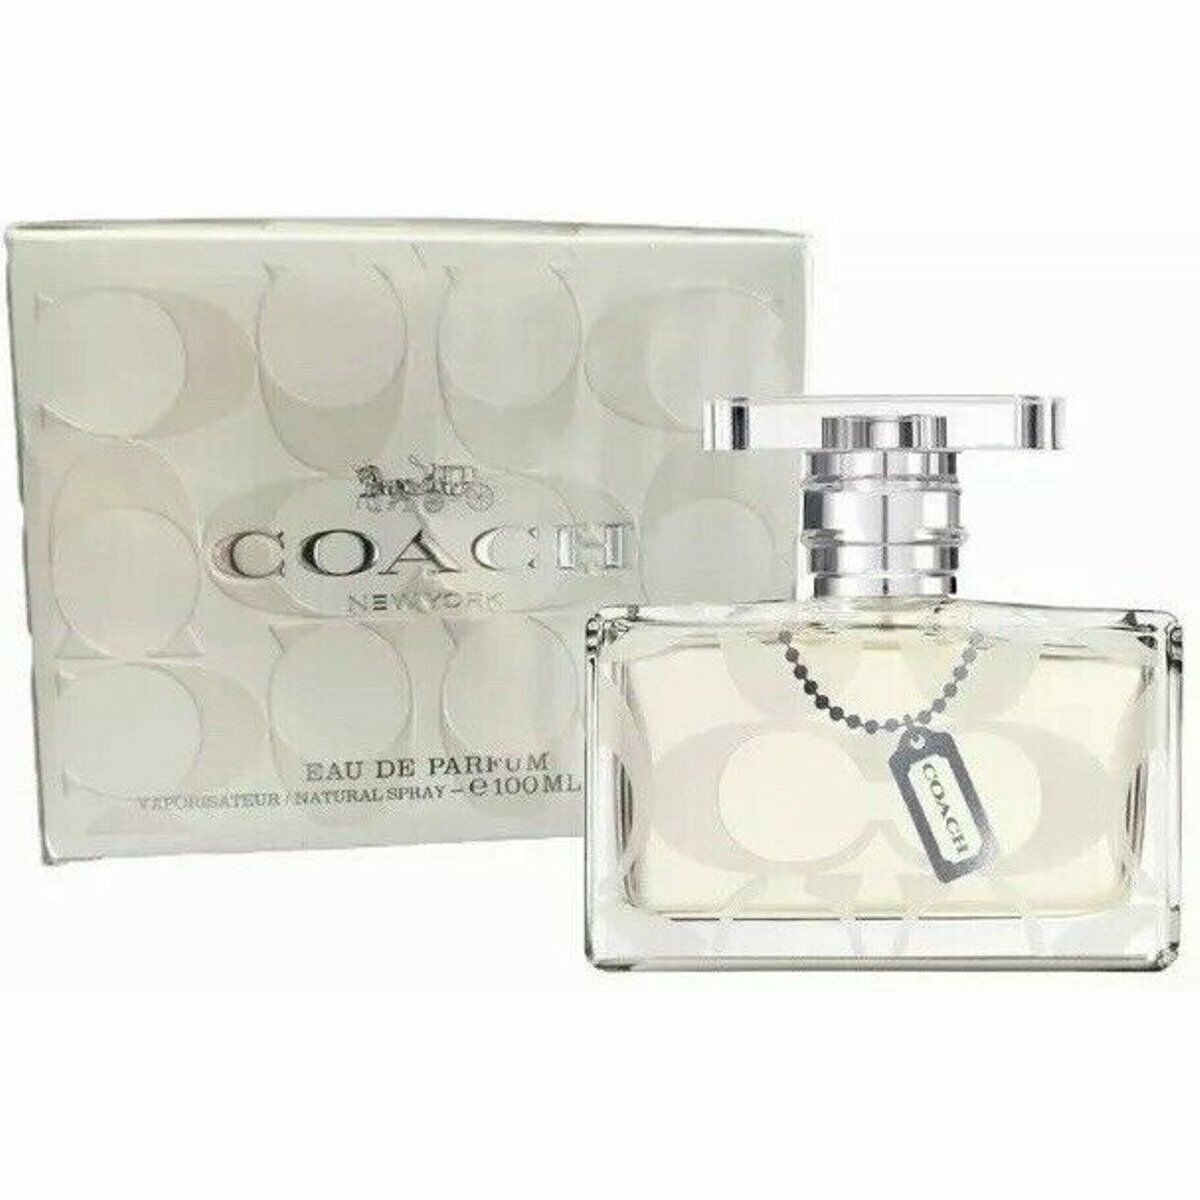 COACH SIGNATURE by Coach perfume 3.3 / 3.4 oz EDP For Women New in Box